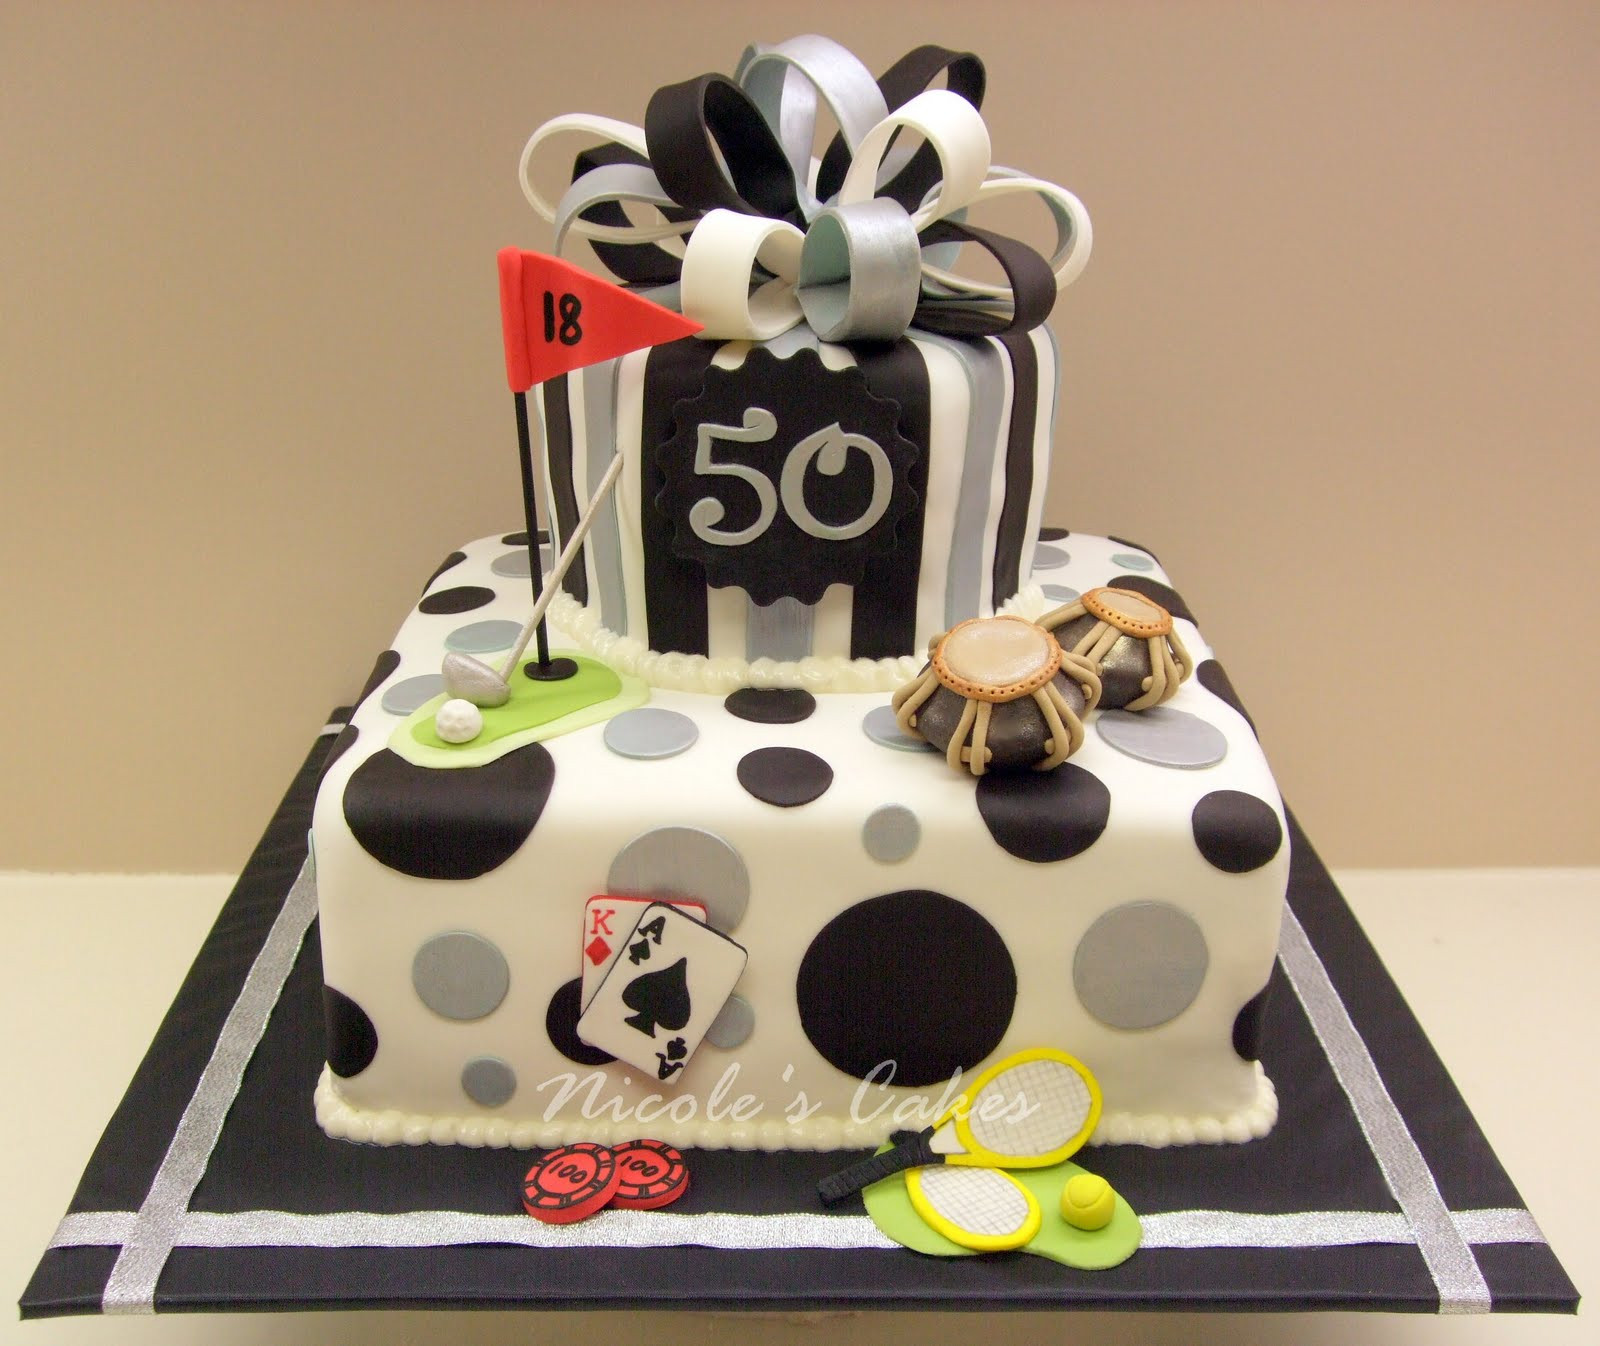 Best ideas about 50th Birthday Cake
. Save or Pin Confections Cakes & Creations Favorite Things A Now.